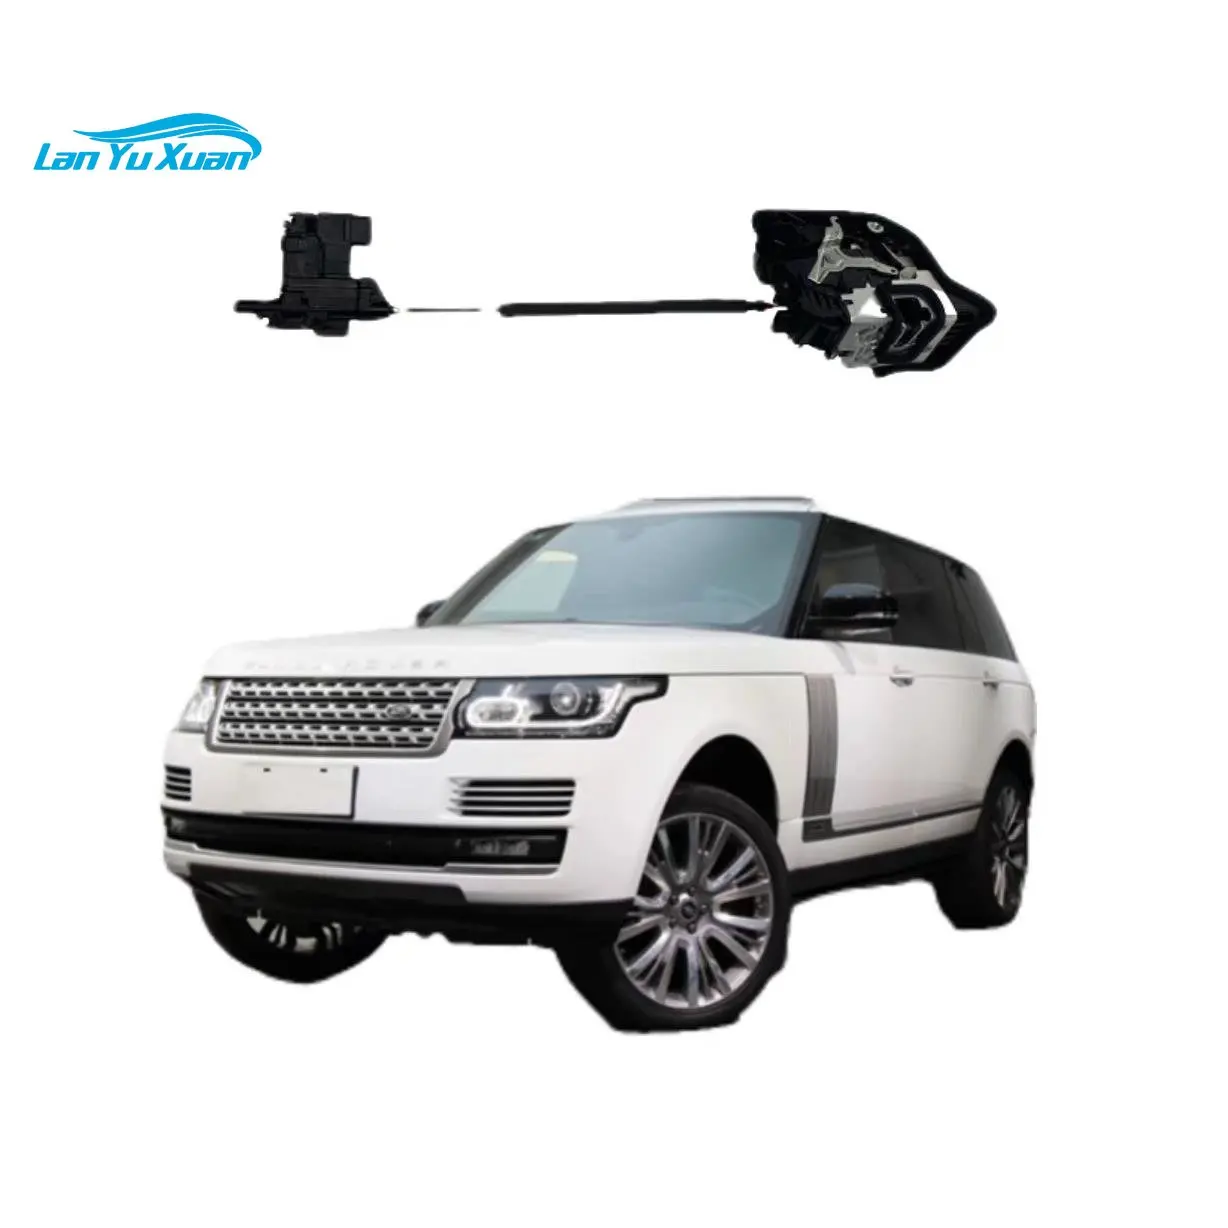 Vehicle Door Soft Power Lock System Power Liftgate Plug And Play Suction Electric For Land Rover 10ch 8ch 8mp 4k poe color night vision set security ip camera system two way audio plug